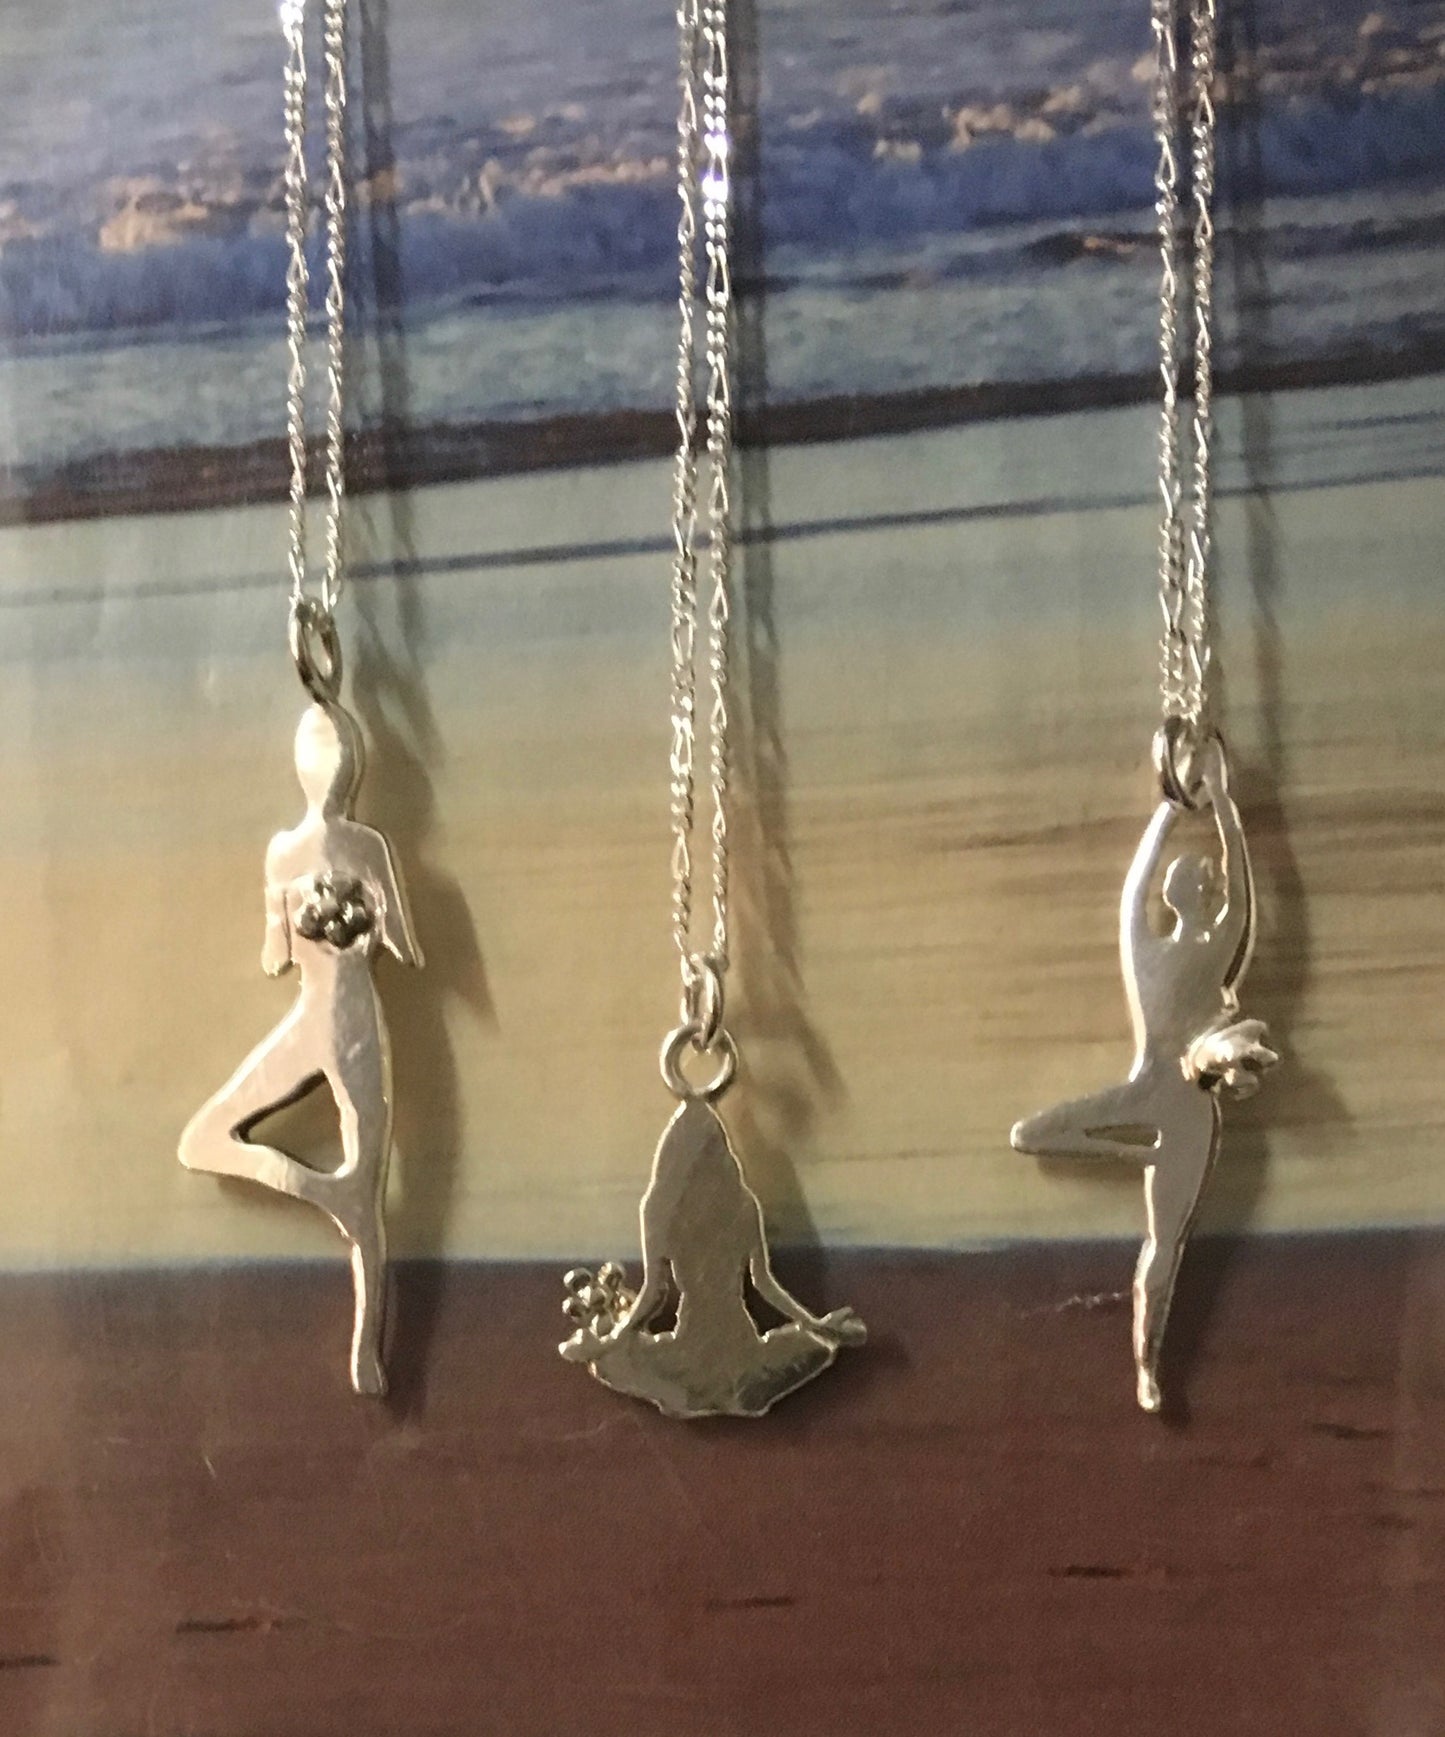 Standing and seated pose necklaces